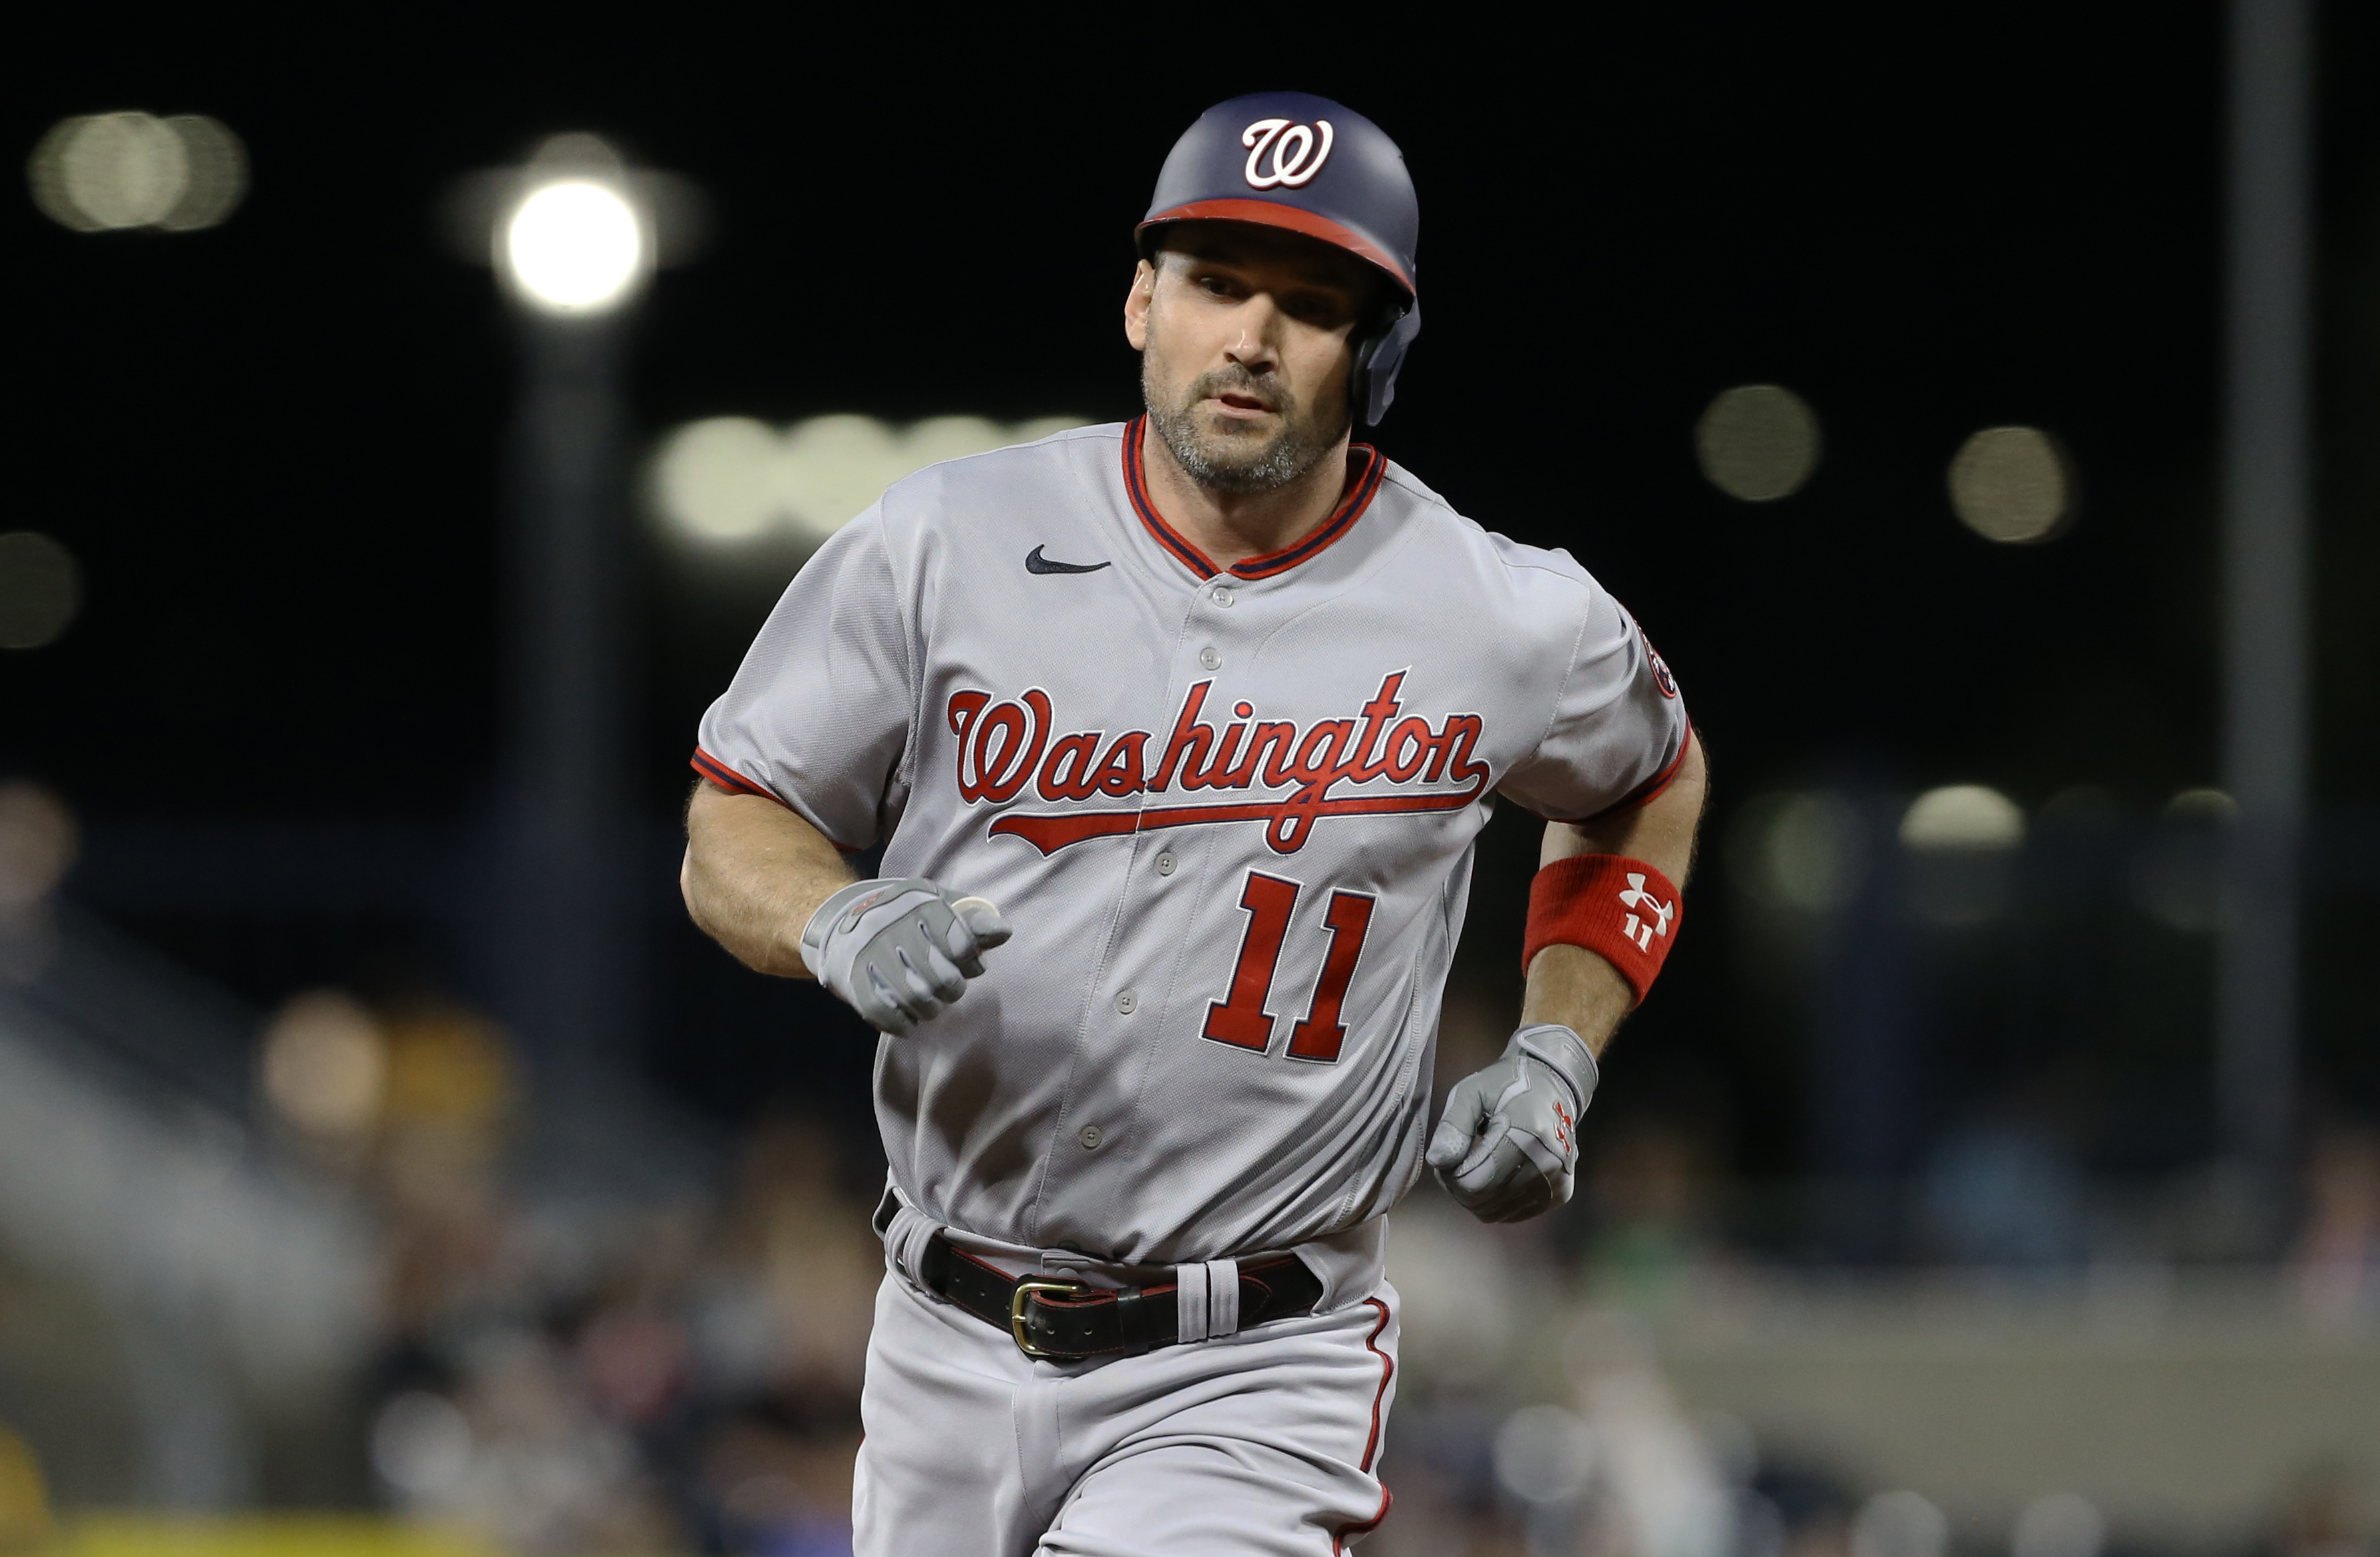 Ryan Zimmerman retires after 17 years with Nationals